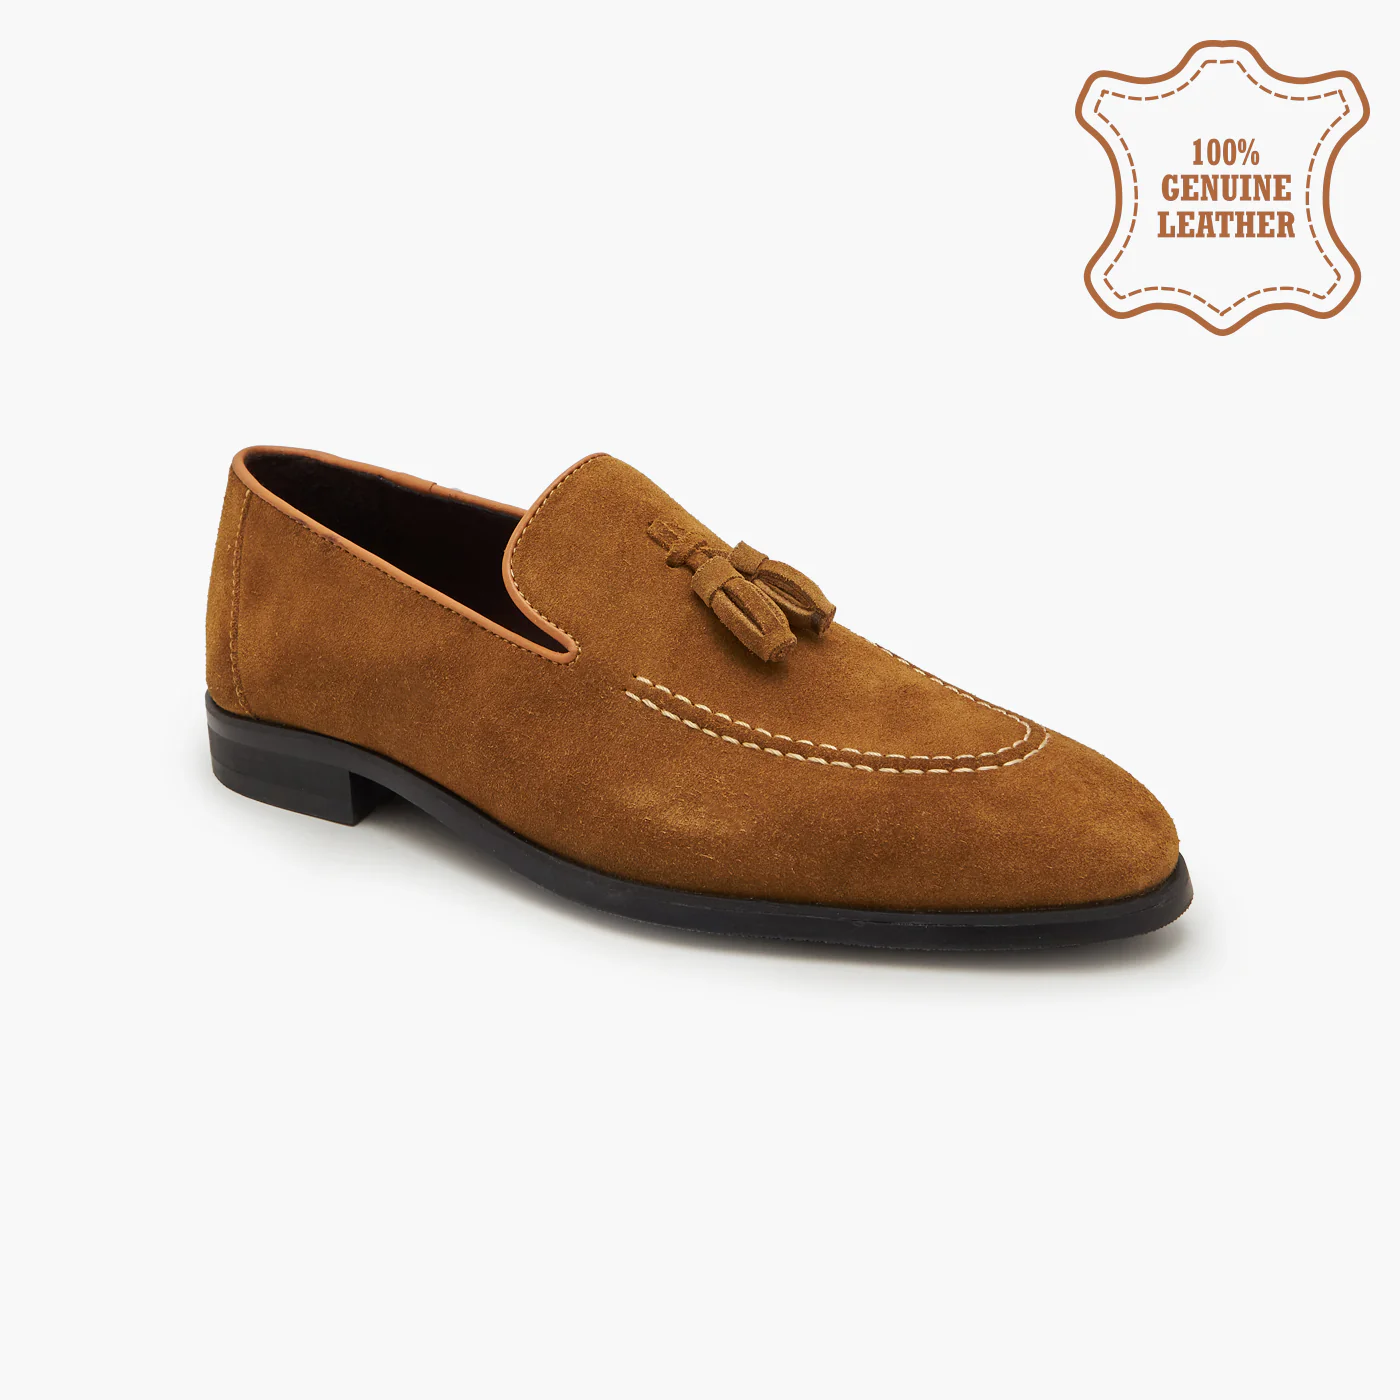 a brown loafer with white stitching